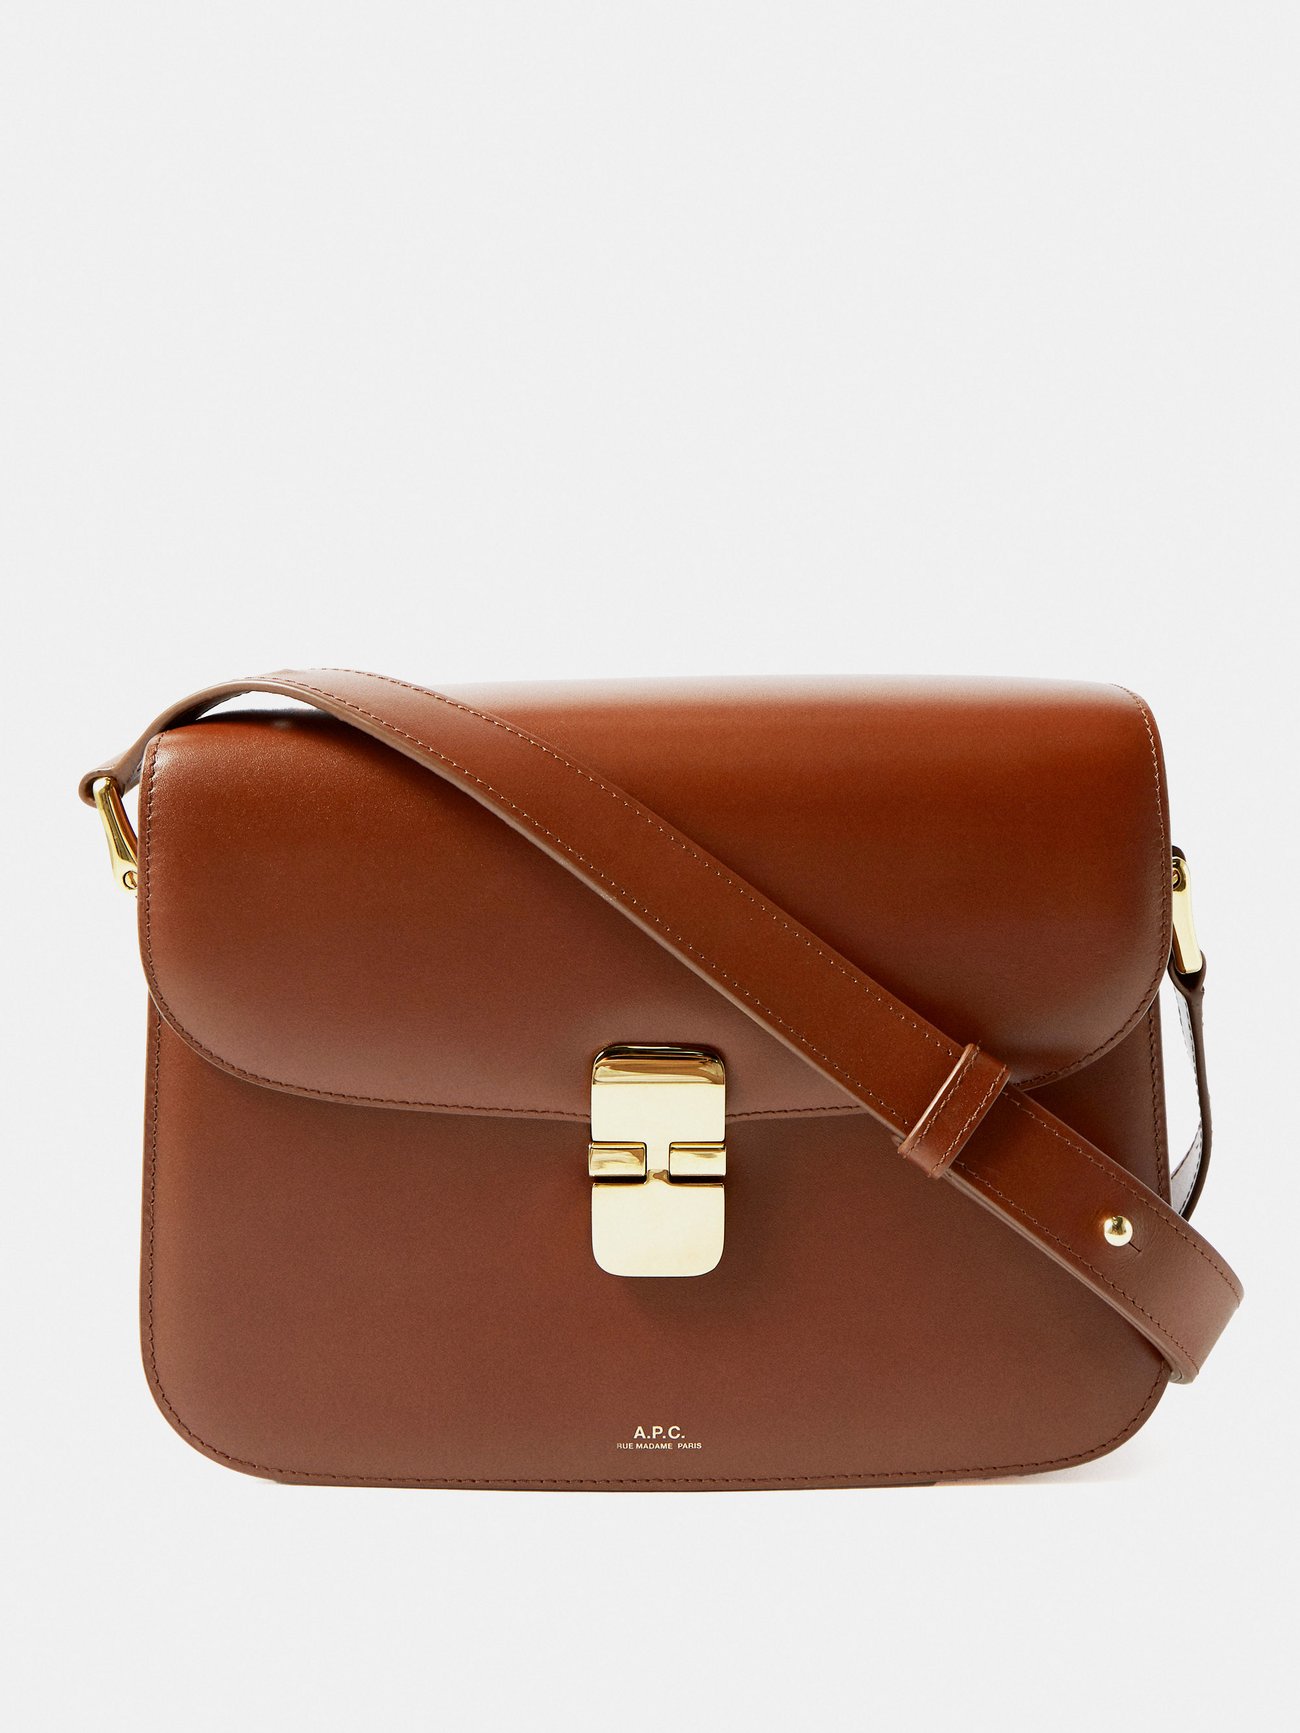 A.P.C  Women's Clothing, Bags & Accessories